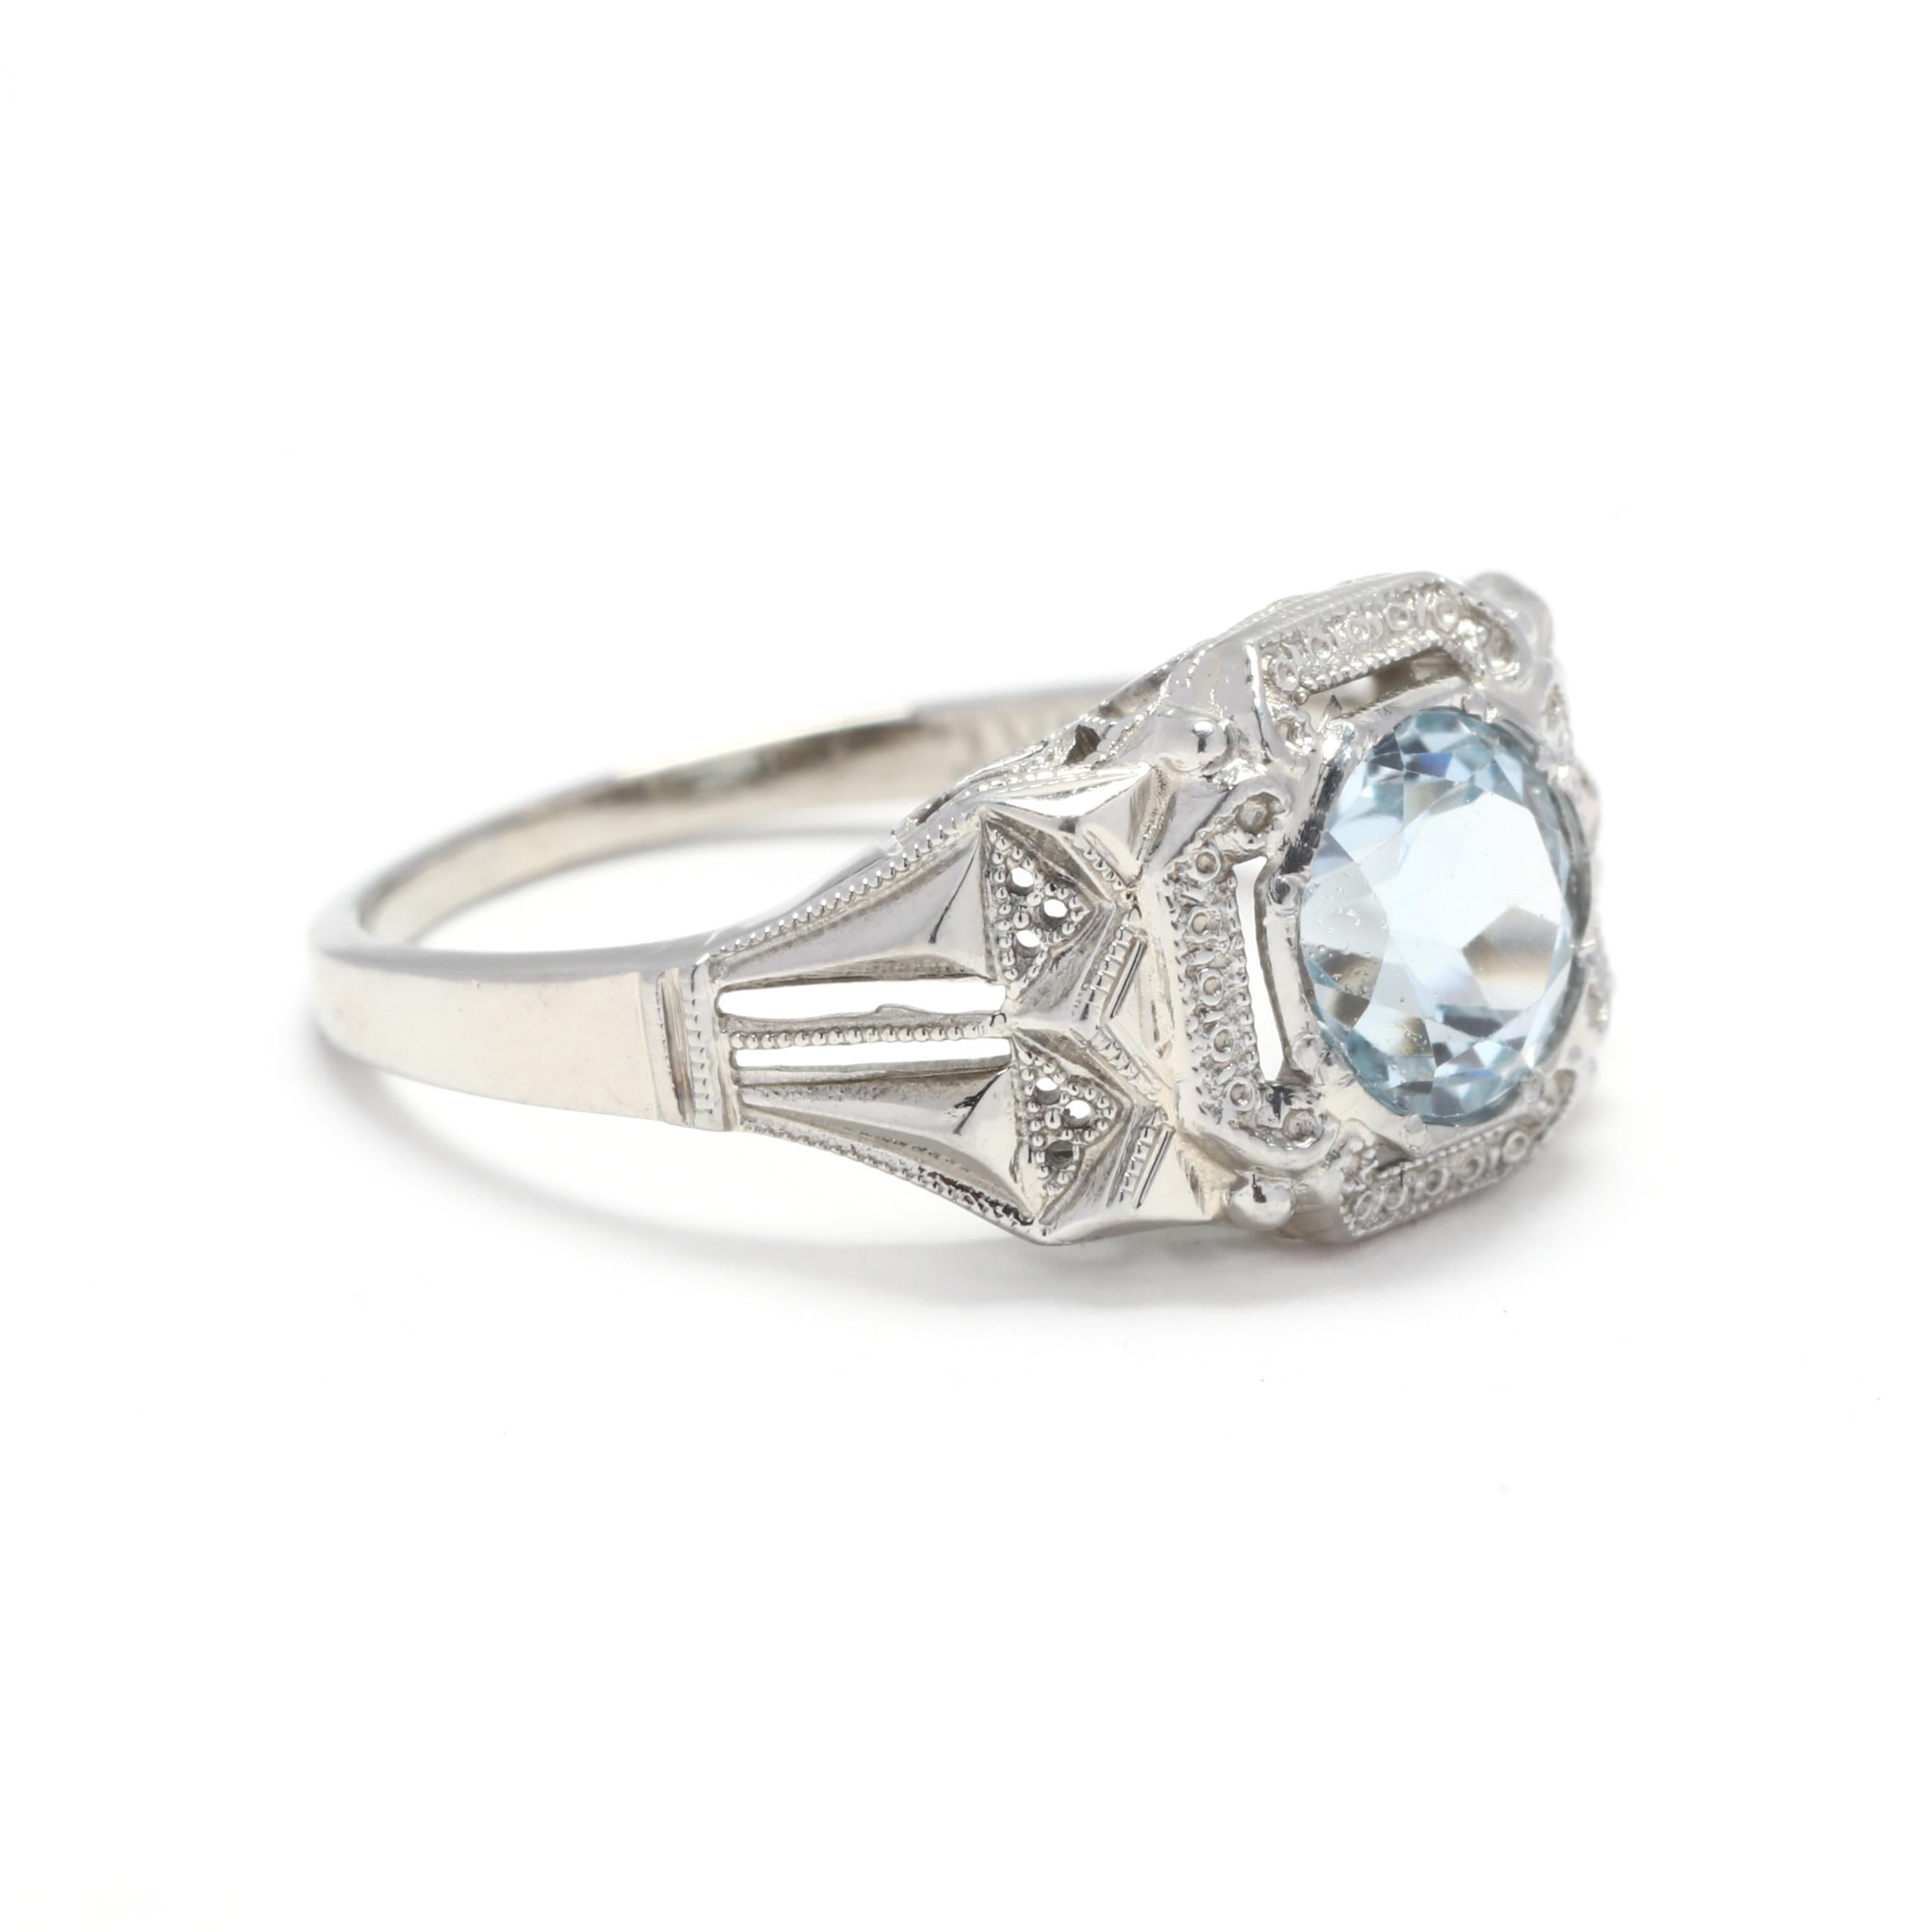 An Art Deco 18 karat white gold and blue topaz engagement ring. This ring features a round cut blue topaz weighing approximately 1.05 carat set in a square scrolled mounting with floral engraving and milgrain detailing.

Stones:
- blue topaz, 1